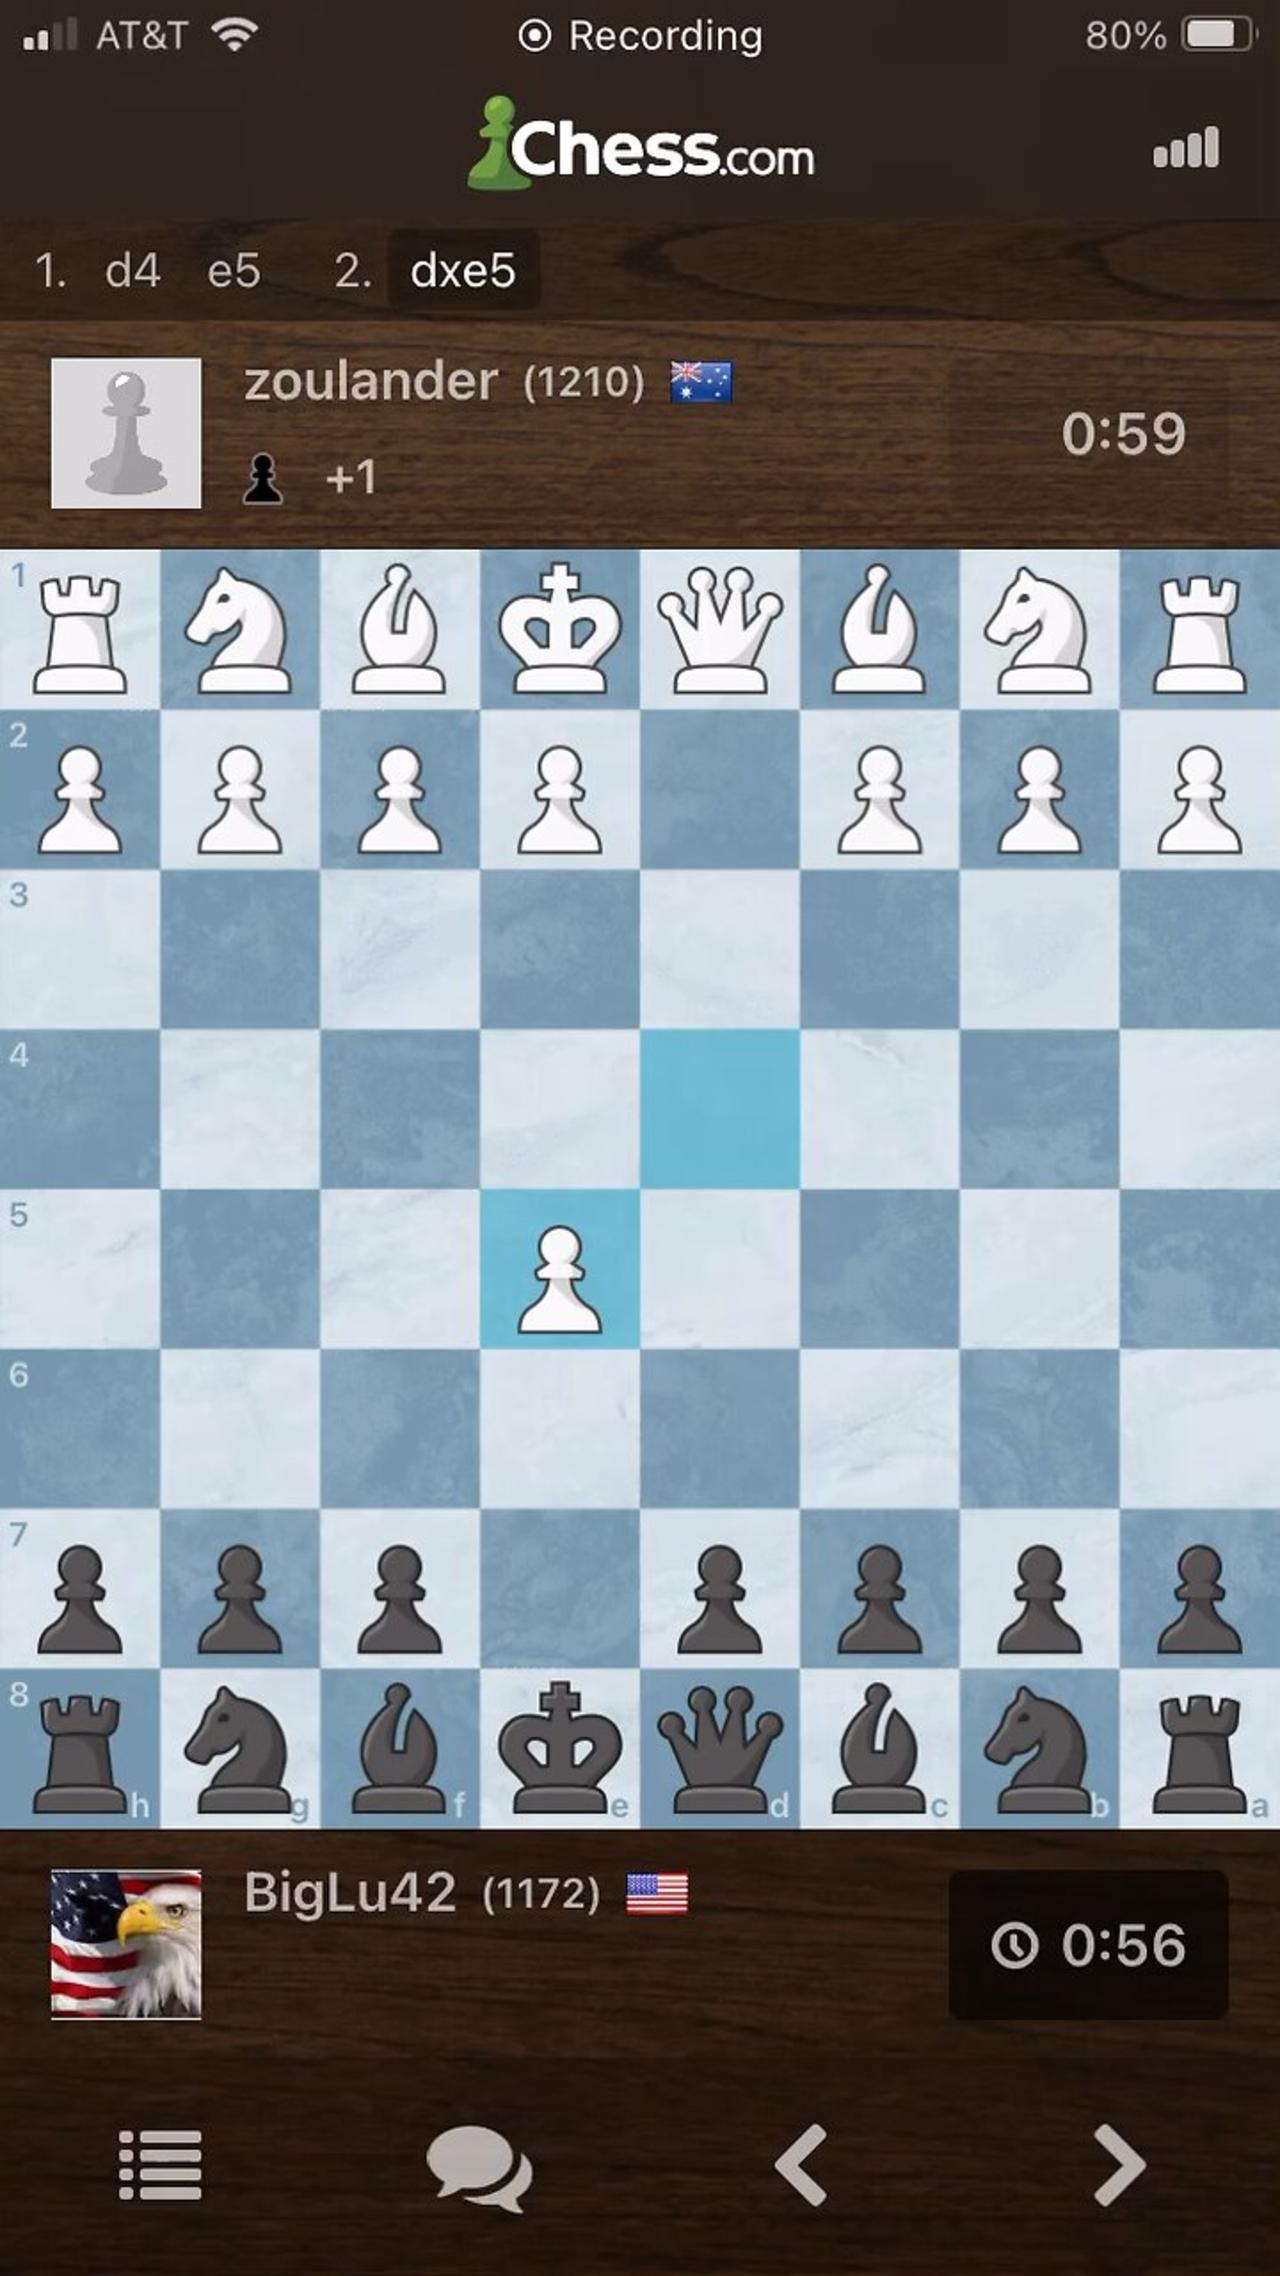 INTERMEDIATE BULLET CHESS GAMEPLAY - when an initial plan doesn’t go great, improvising can be🔑